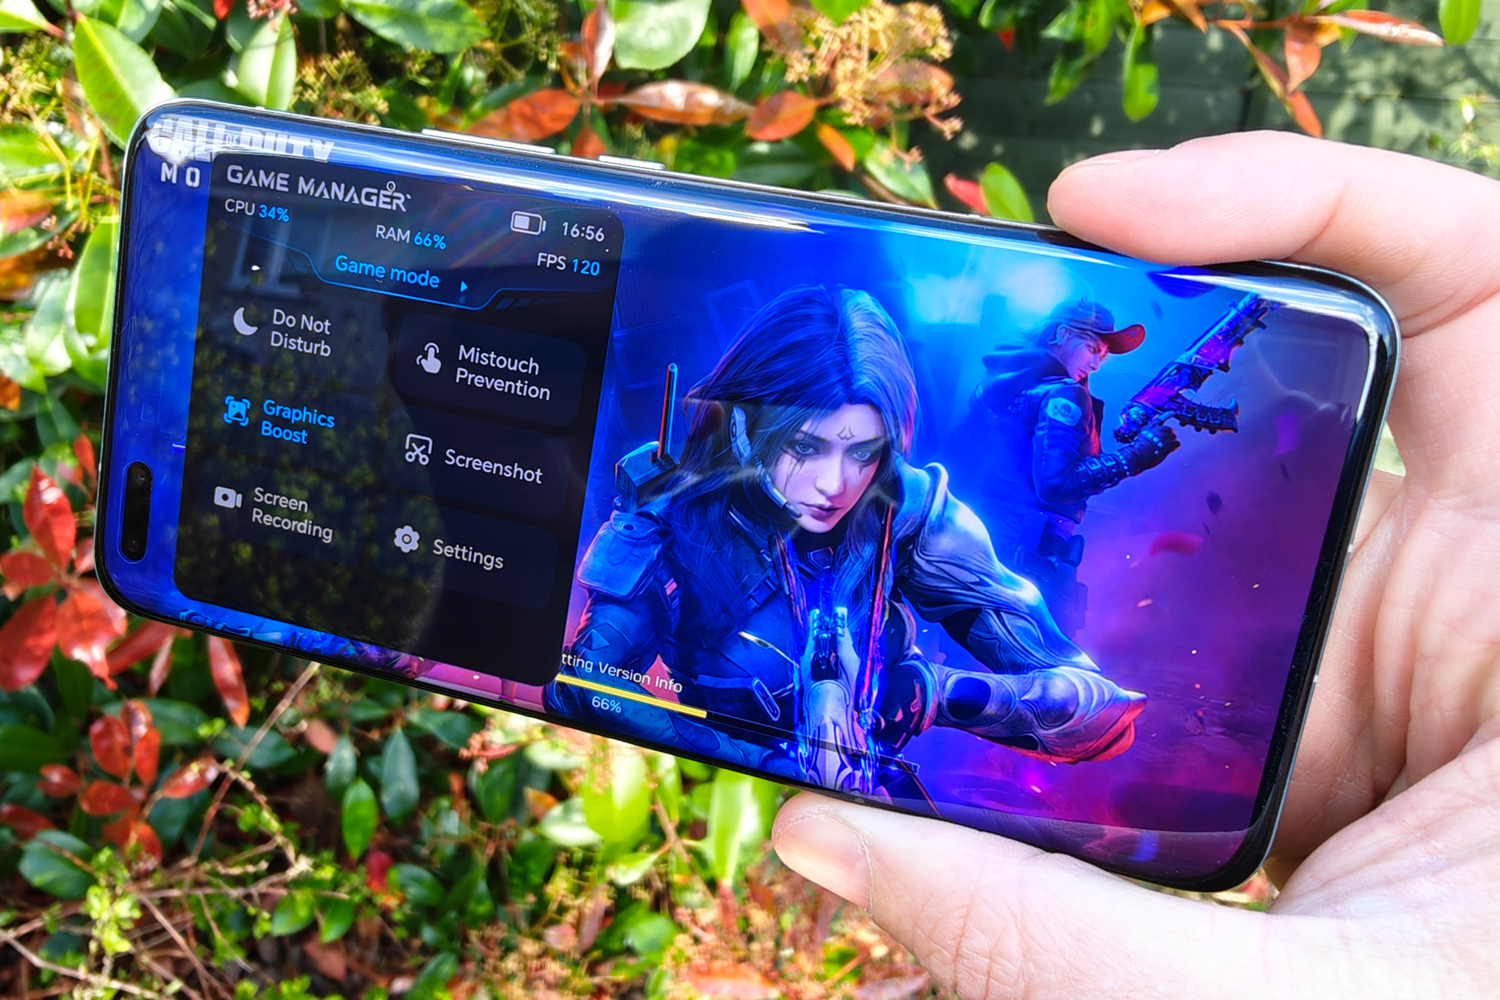 Honor Magic 5 Pro Review: In the eye of the beholder